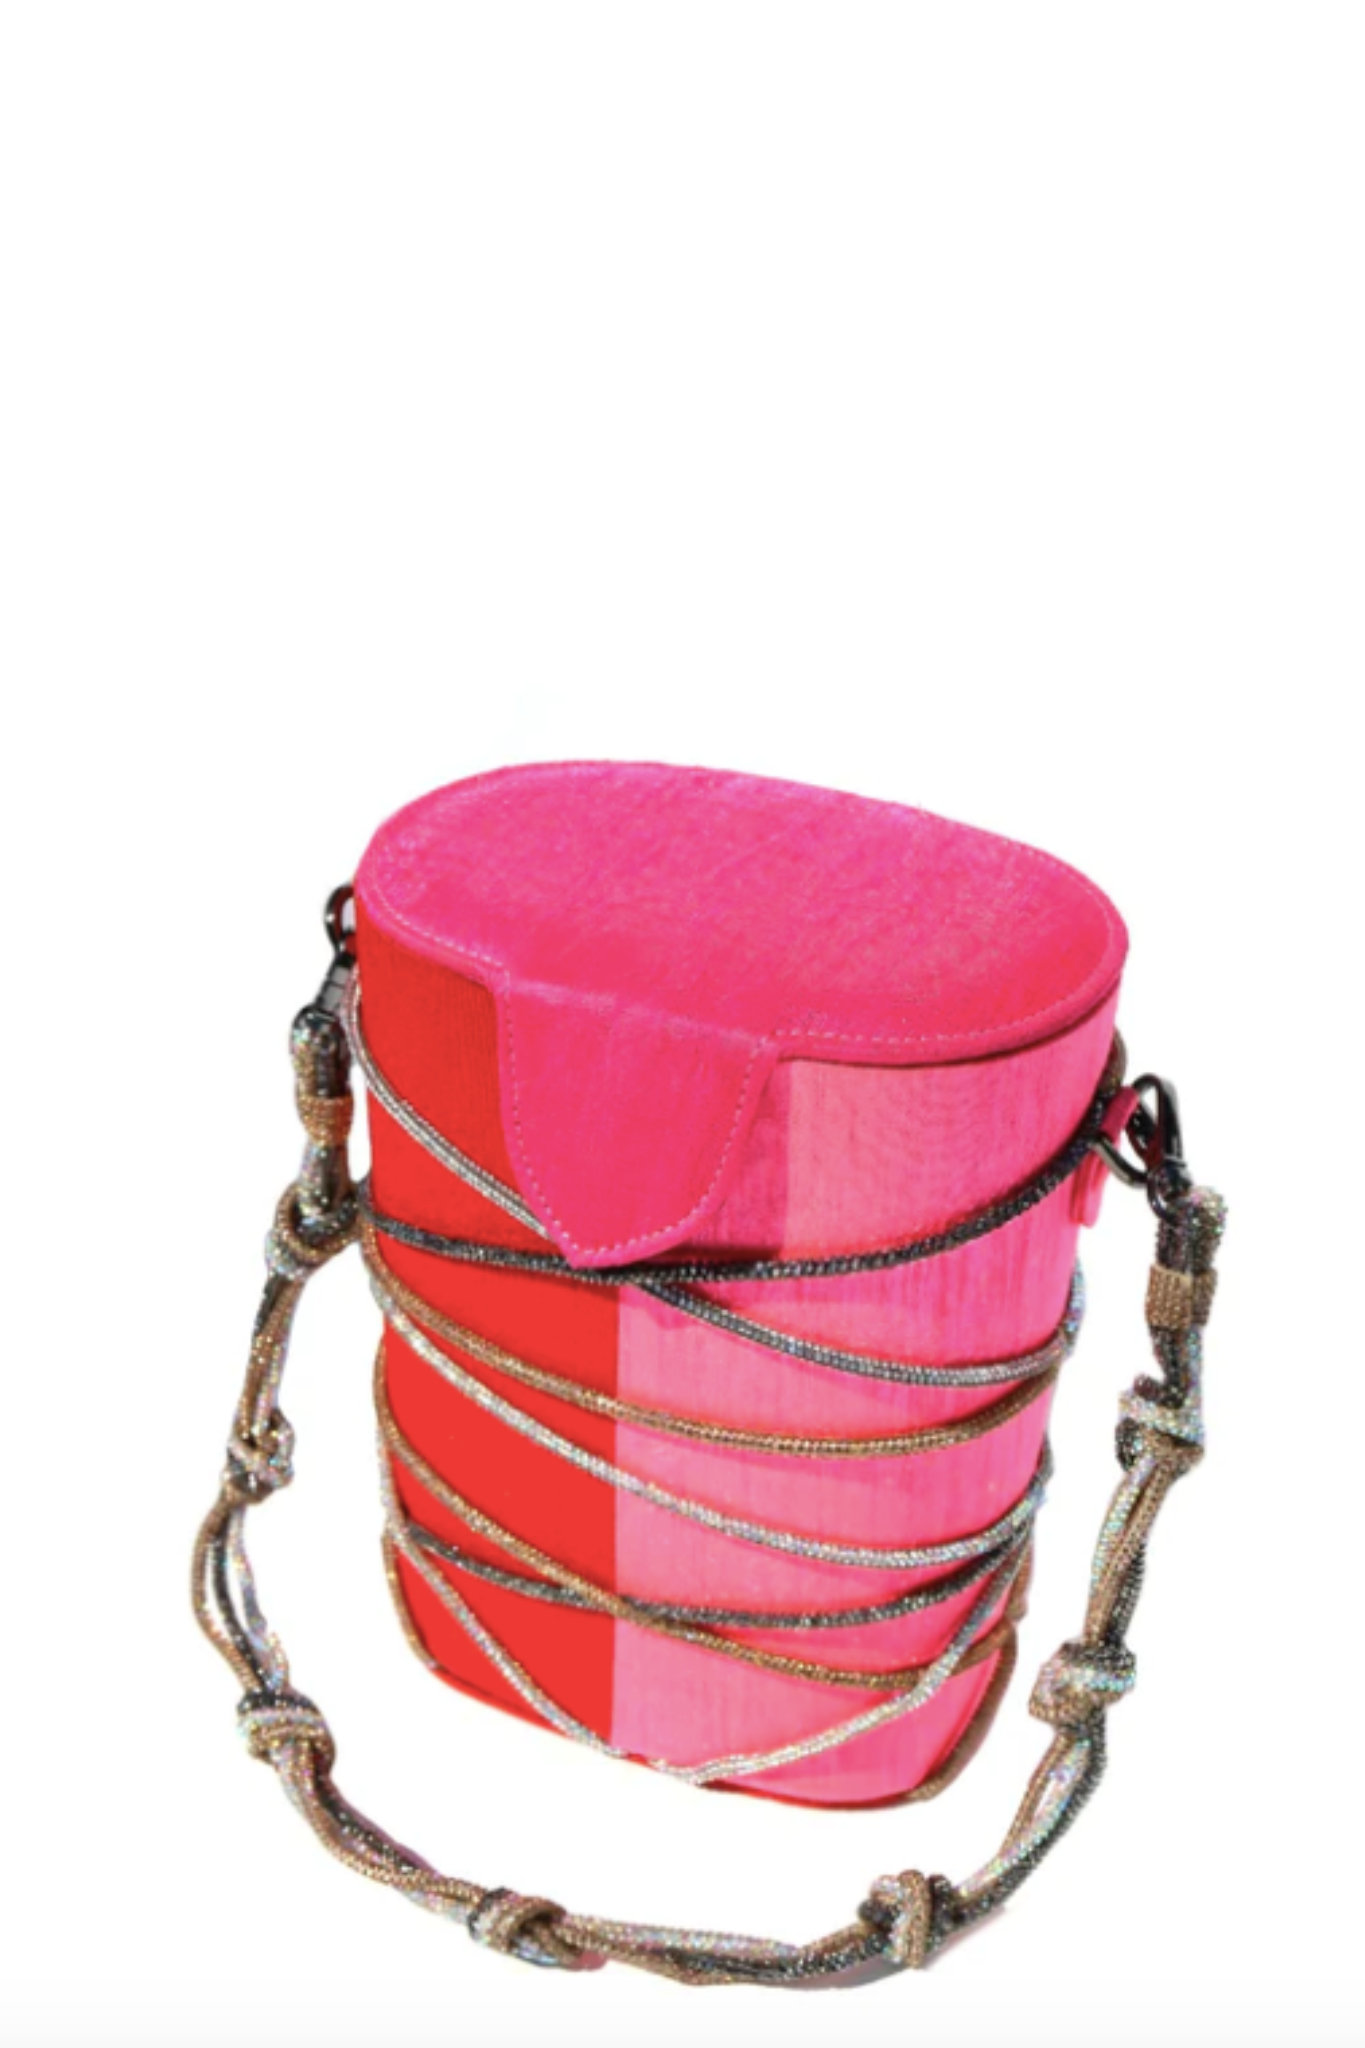 Knotty Bucket bag in Pink by Simitri Designs - RENTAL